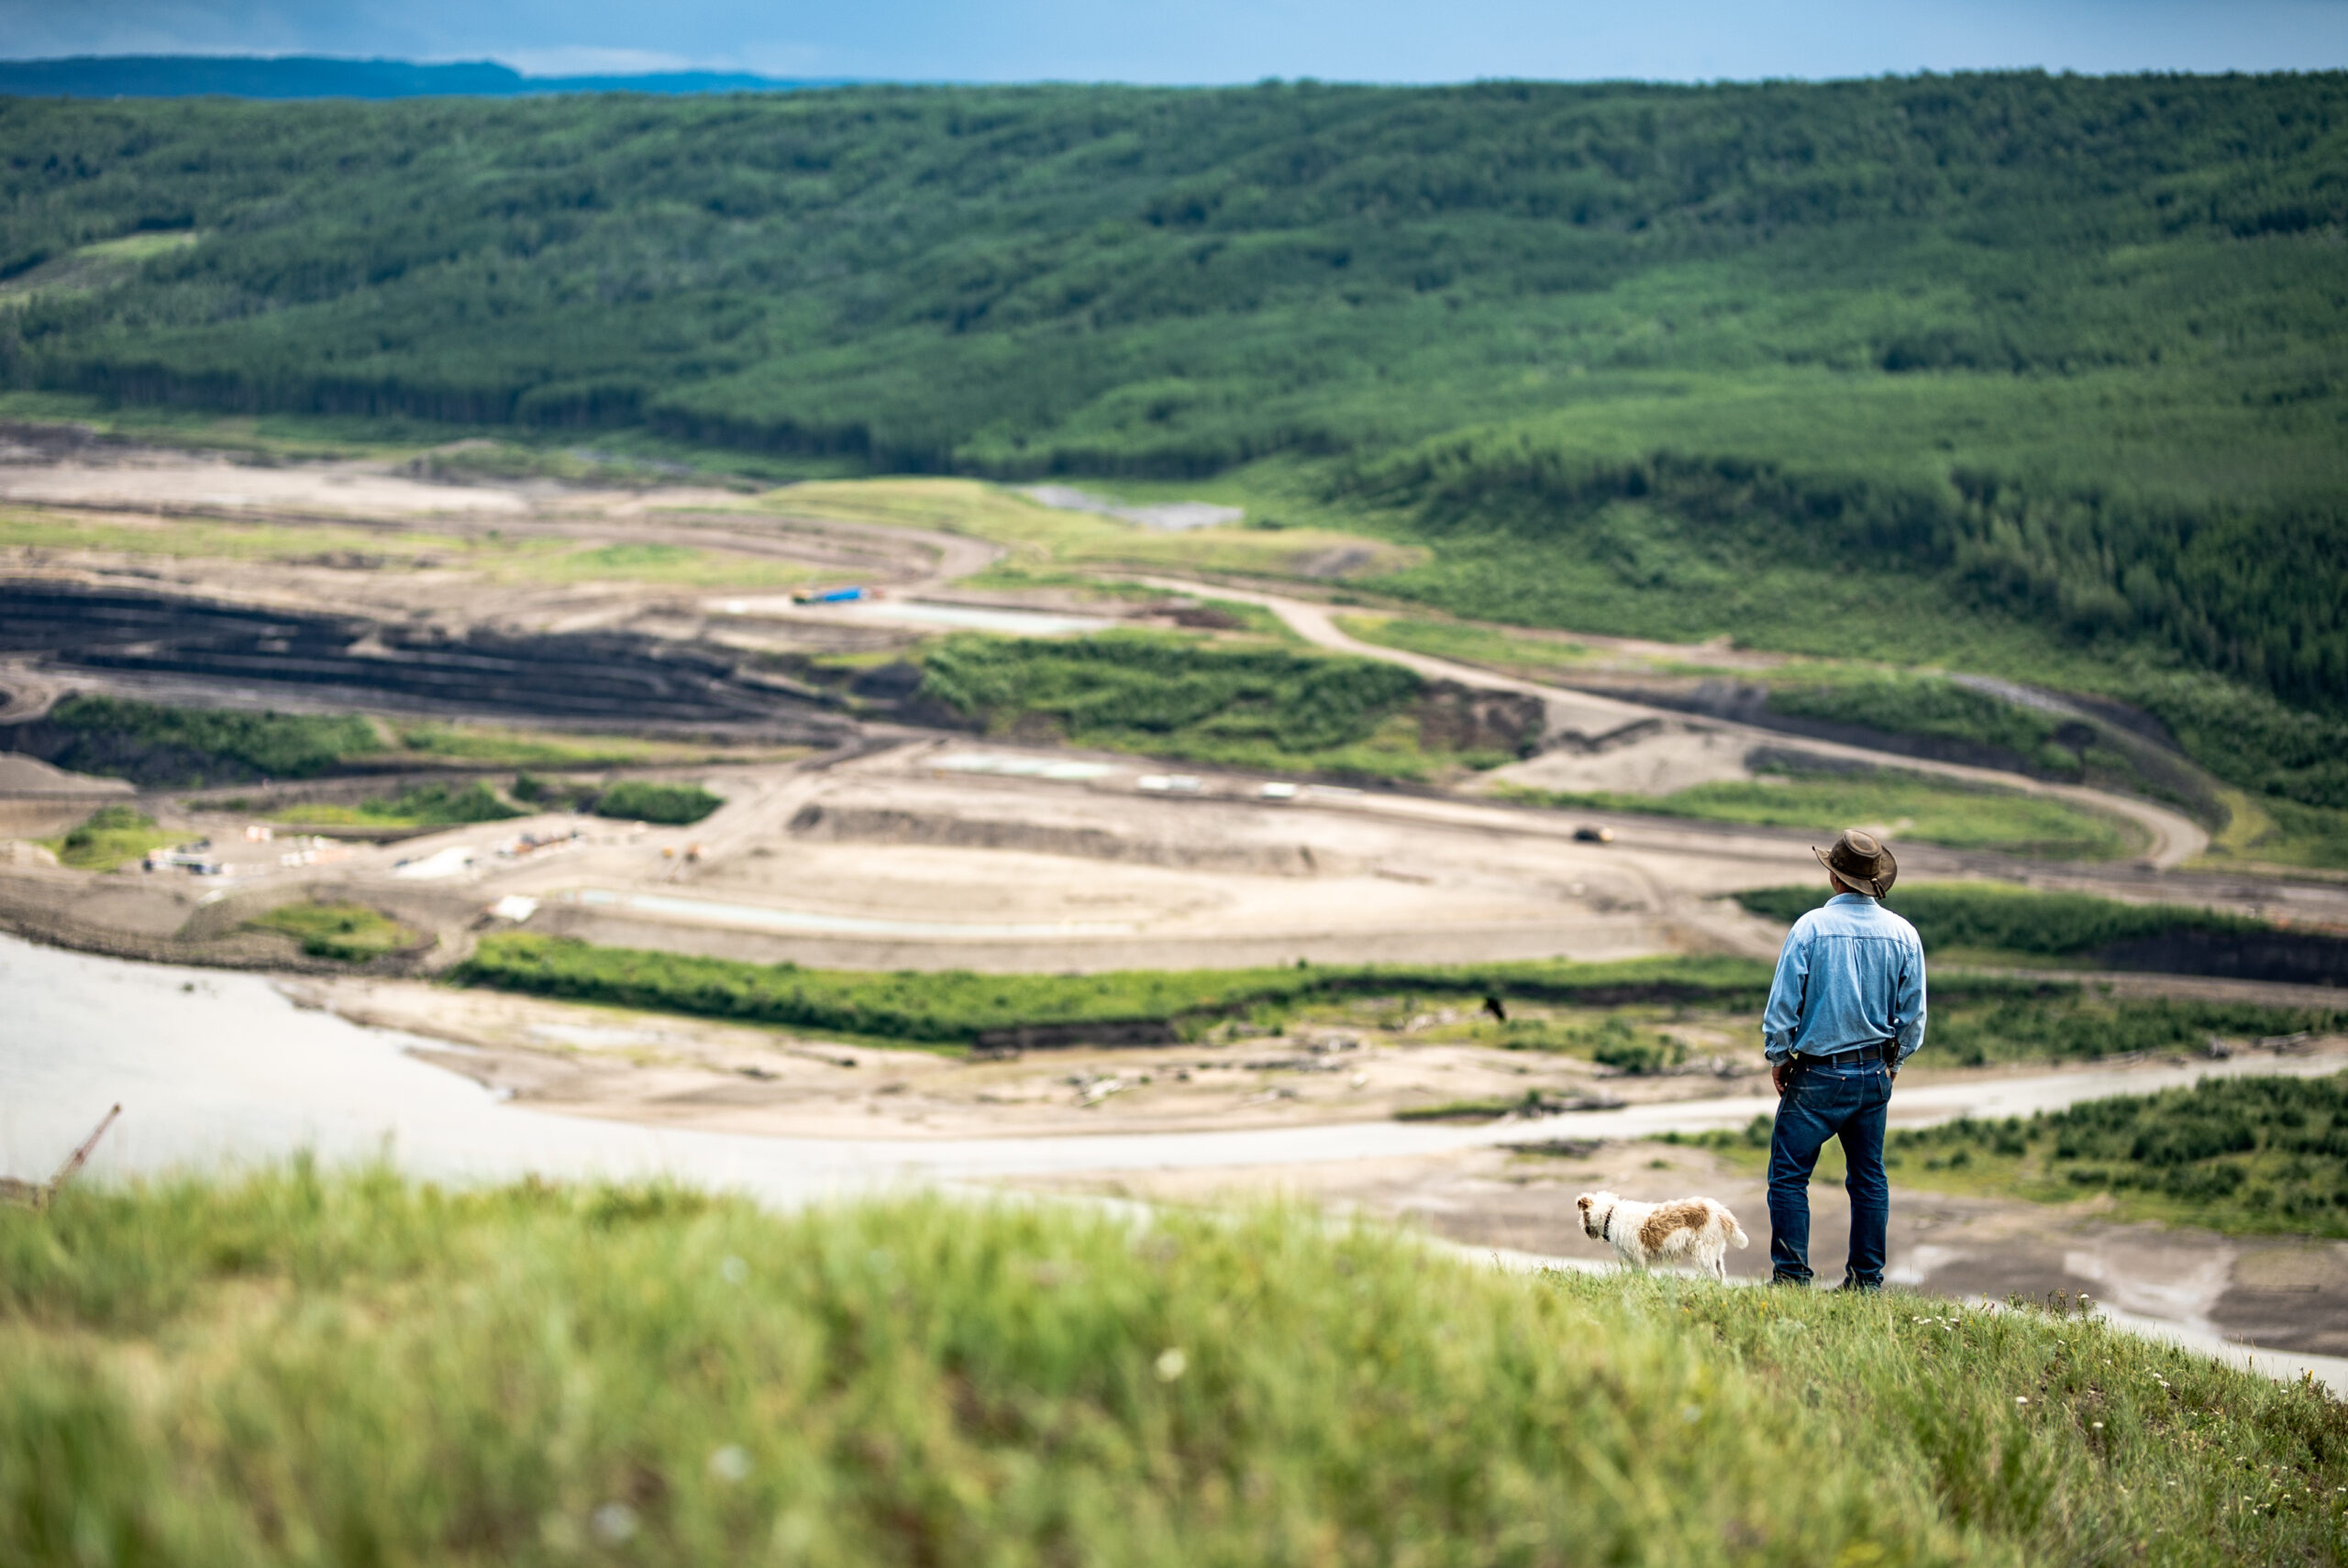 Peace Valley farmer looks out over land impacted by the Site C dam